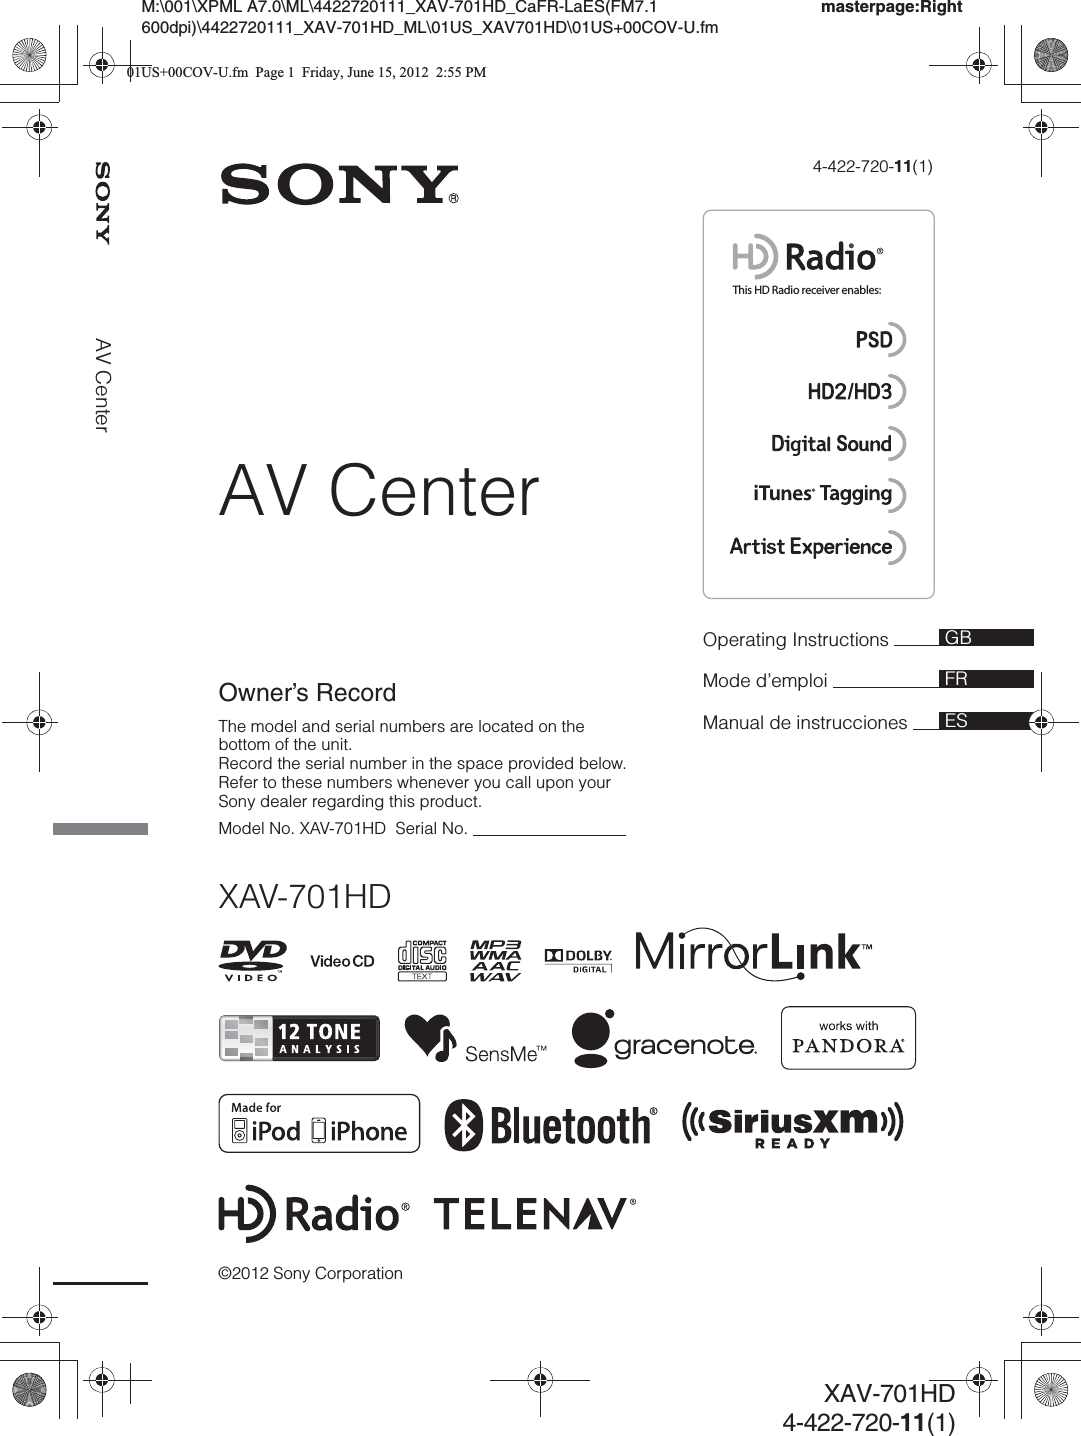 This HD Radio receiver enables:AV Center©2012 Sony Corporation4-422-720-11(1)XAV-701HDmasterpage:RightM:\001\XPML A7.0\ML\4422720111_XAV-701HD_CaFR-LaES(FM7.1 600dpi)\4422720111_XAV-701HD_ML\01US_XAV701HD\01US+00COV-U.fmXAV-701HD4-422-720-11(1)Operating Instructions Mode d’emploi Manual de instrucciones GBFRESOwner’s RecordThe model and serial numbers are located on the bottom of the unit.Record the serial number in the space provided below.Refer to these numbers whenever you call upon your Sony dealer regarding this product.Model No. XAV-701HD  Serial No.                                  AV Center01US+00COV-U.fm  Page 1  Friday, June 15, 2012  2:55 PM